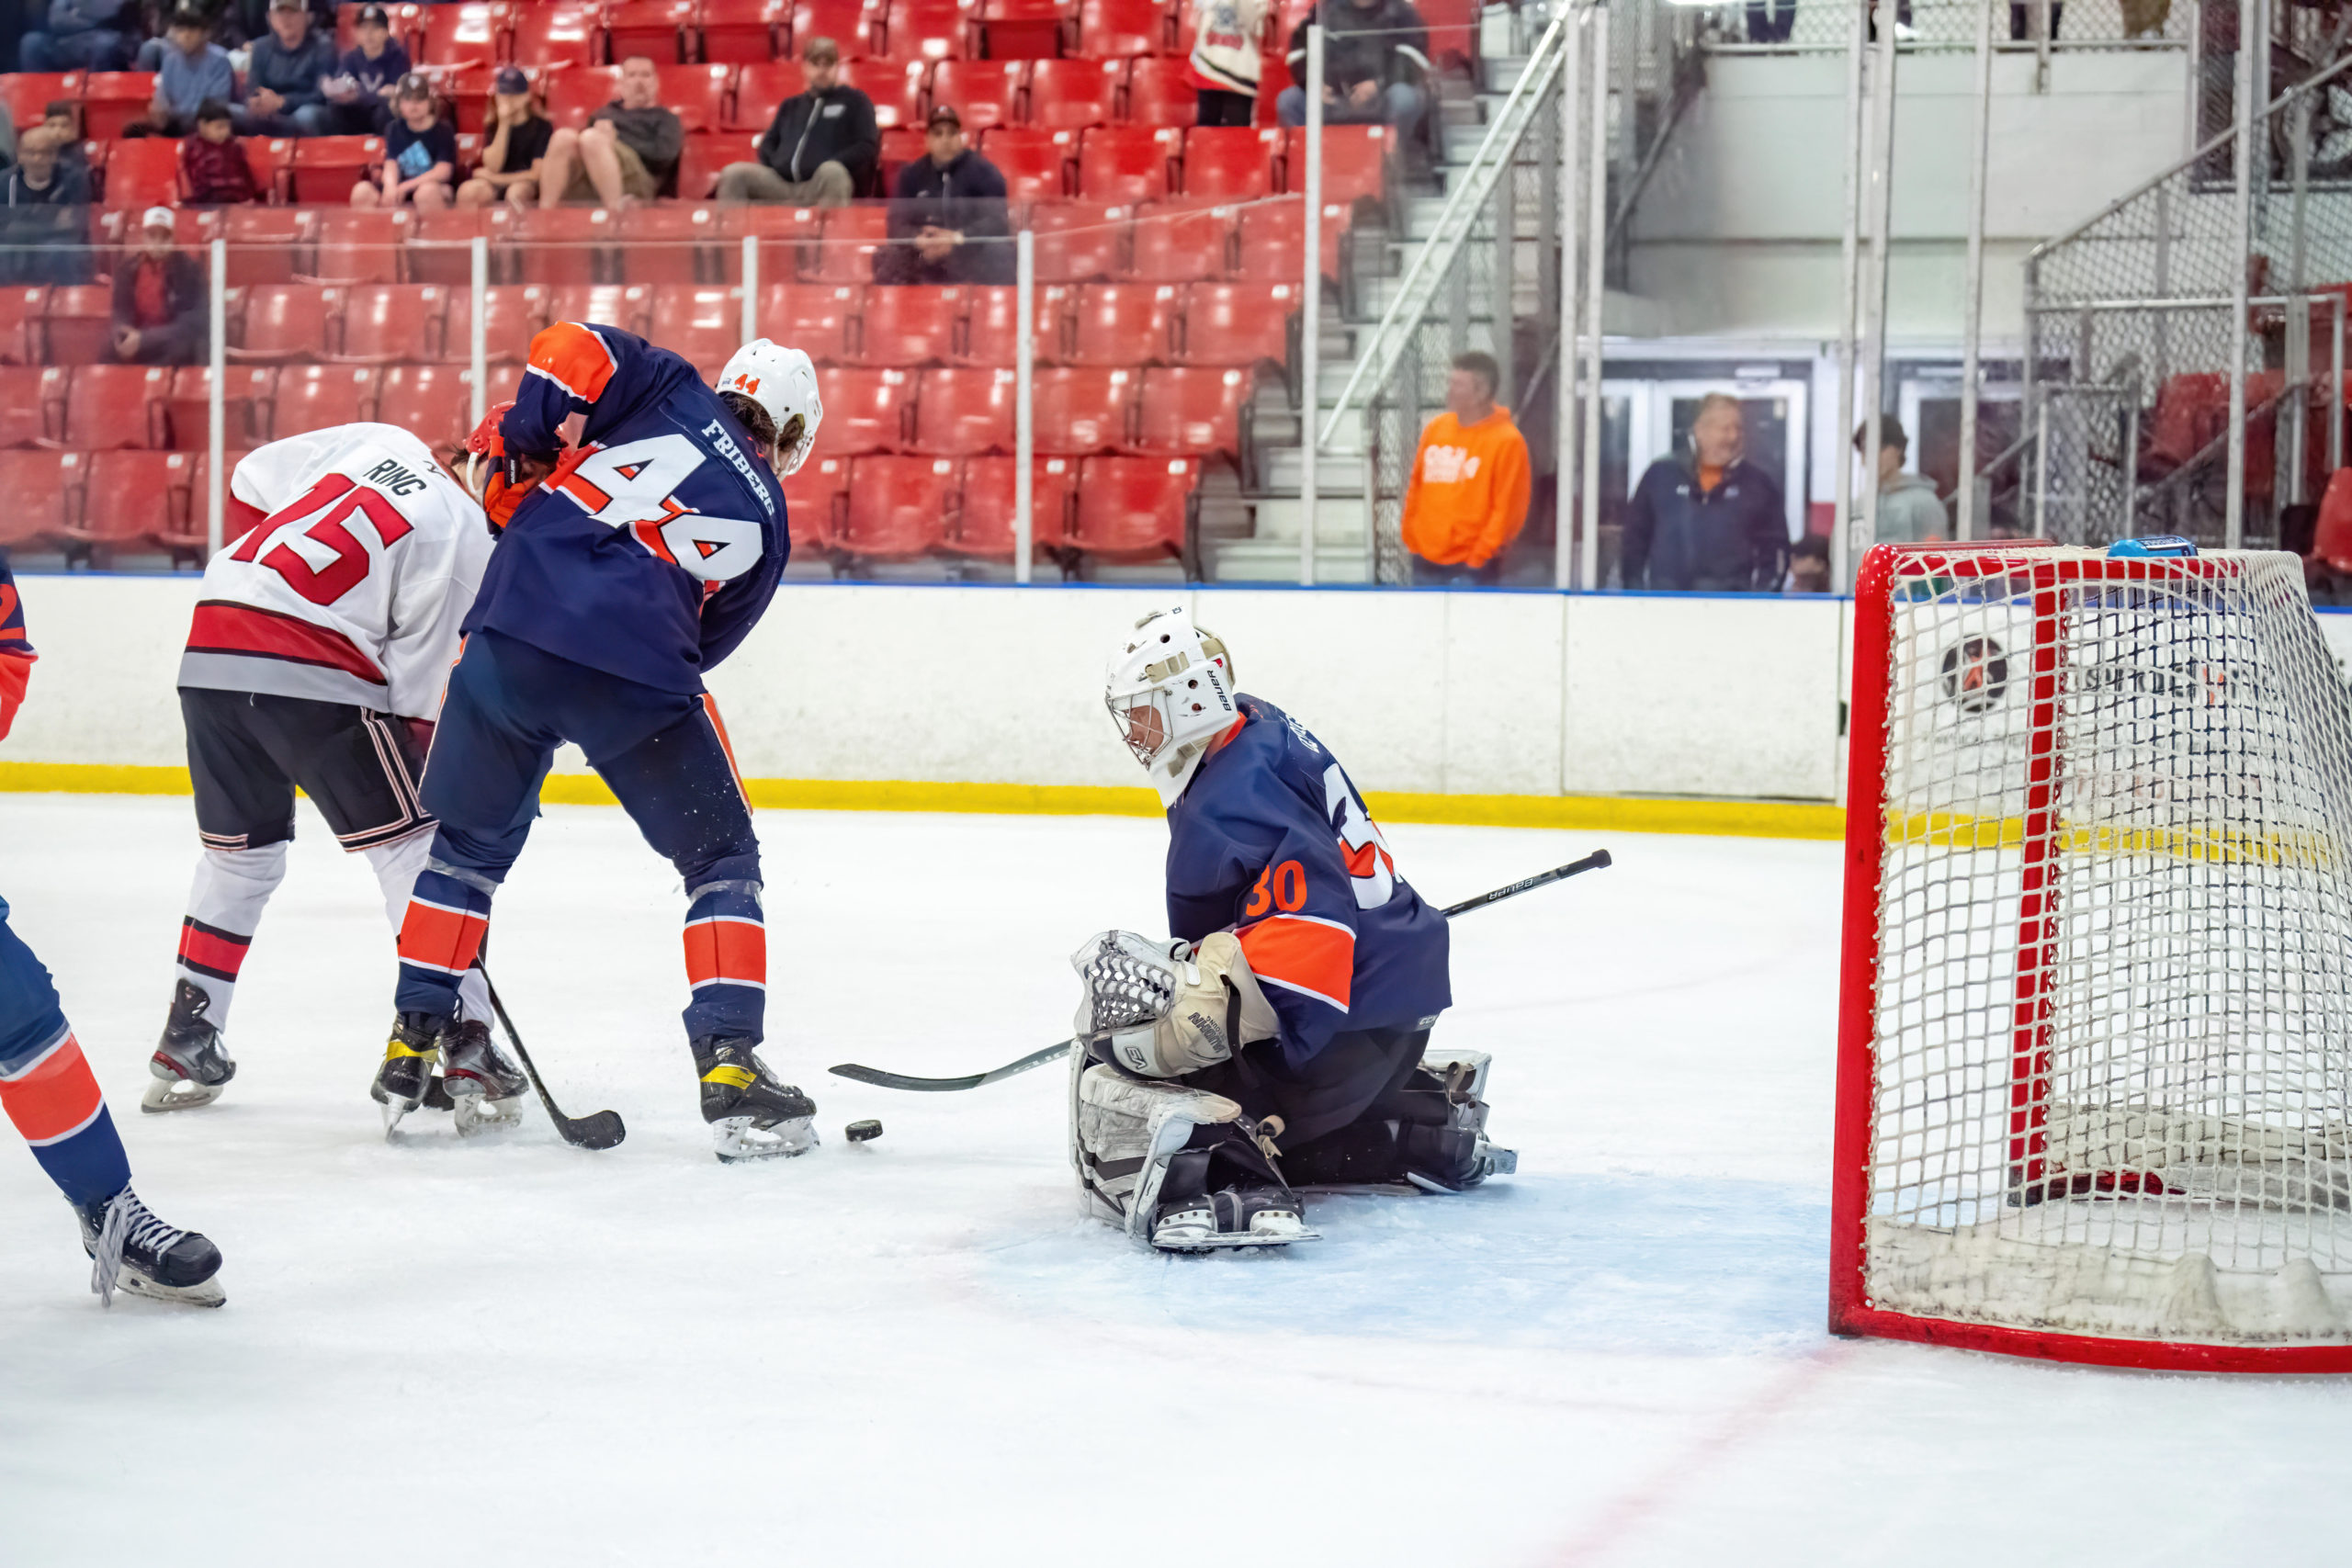 Rings’ 2 goals help Titans top Generals 6 – 2 and tie series at one